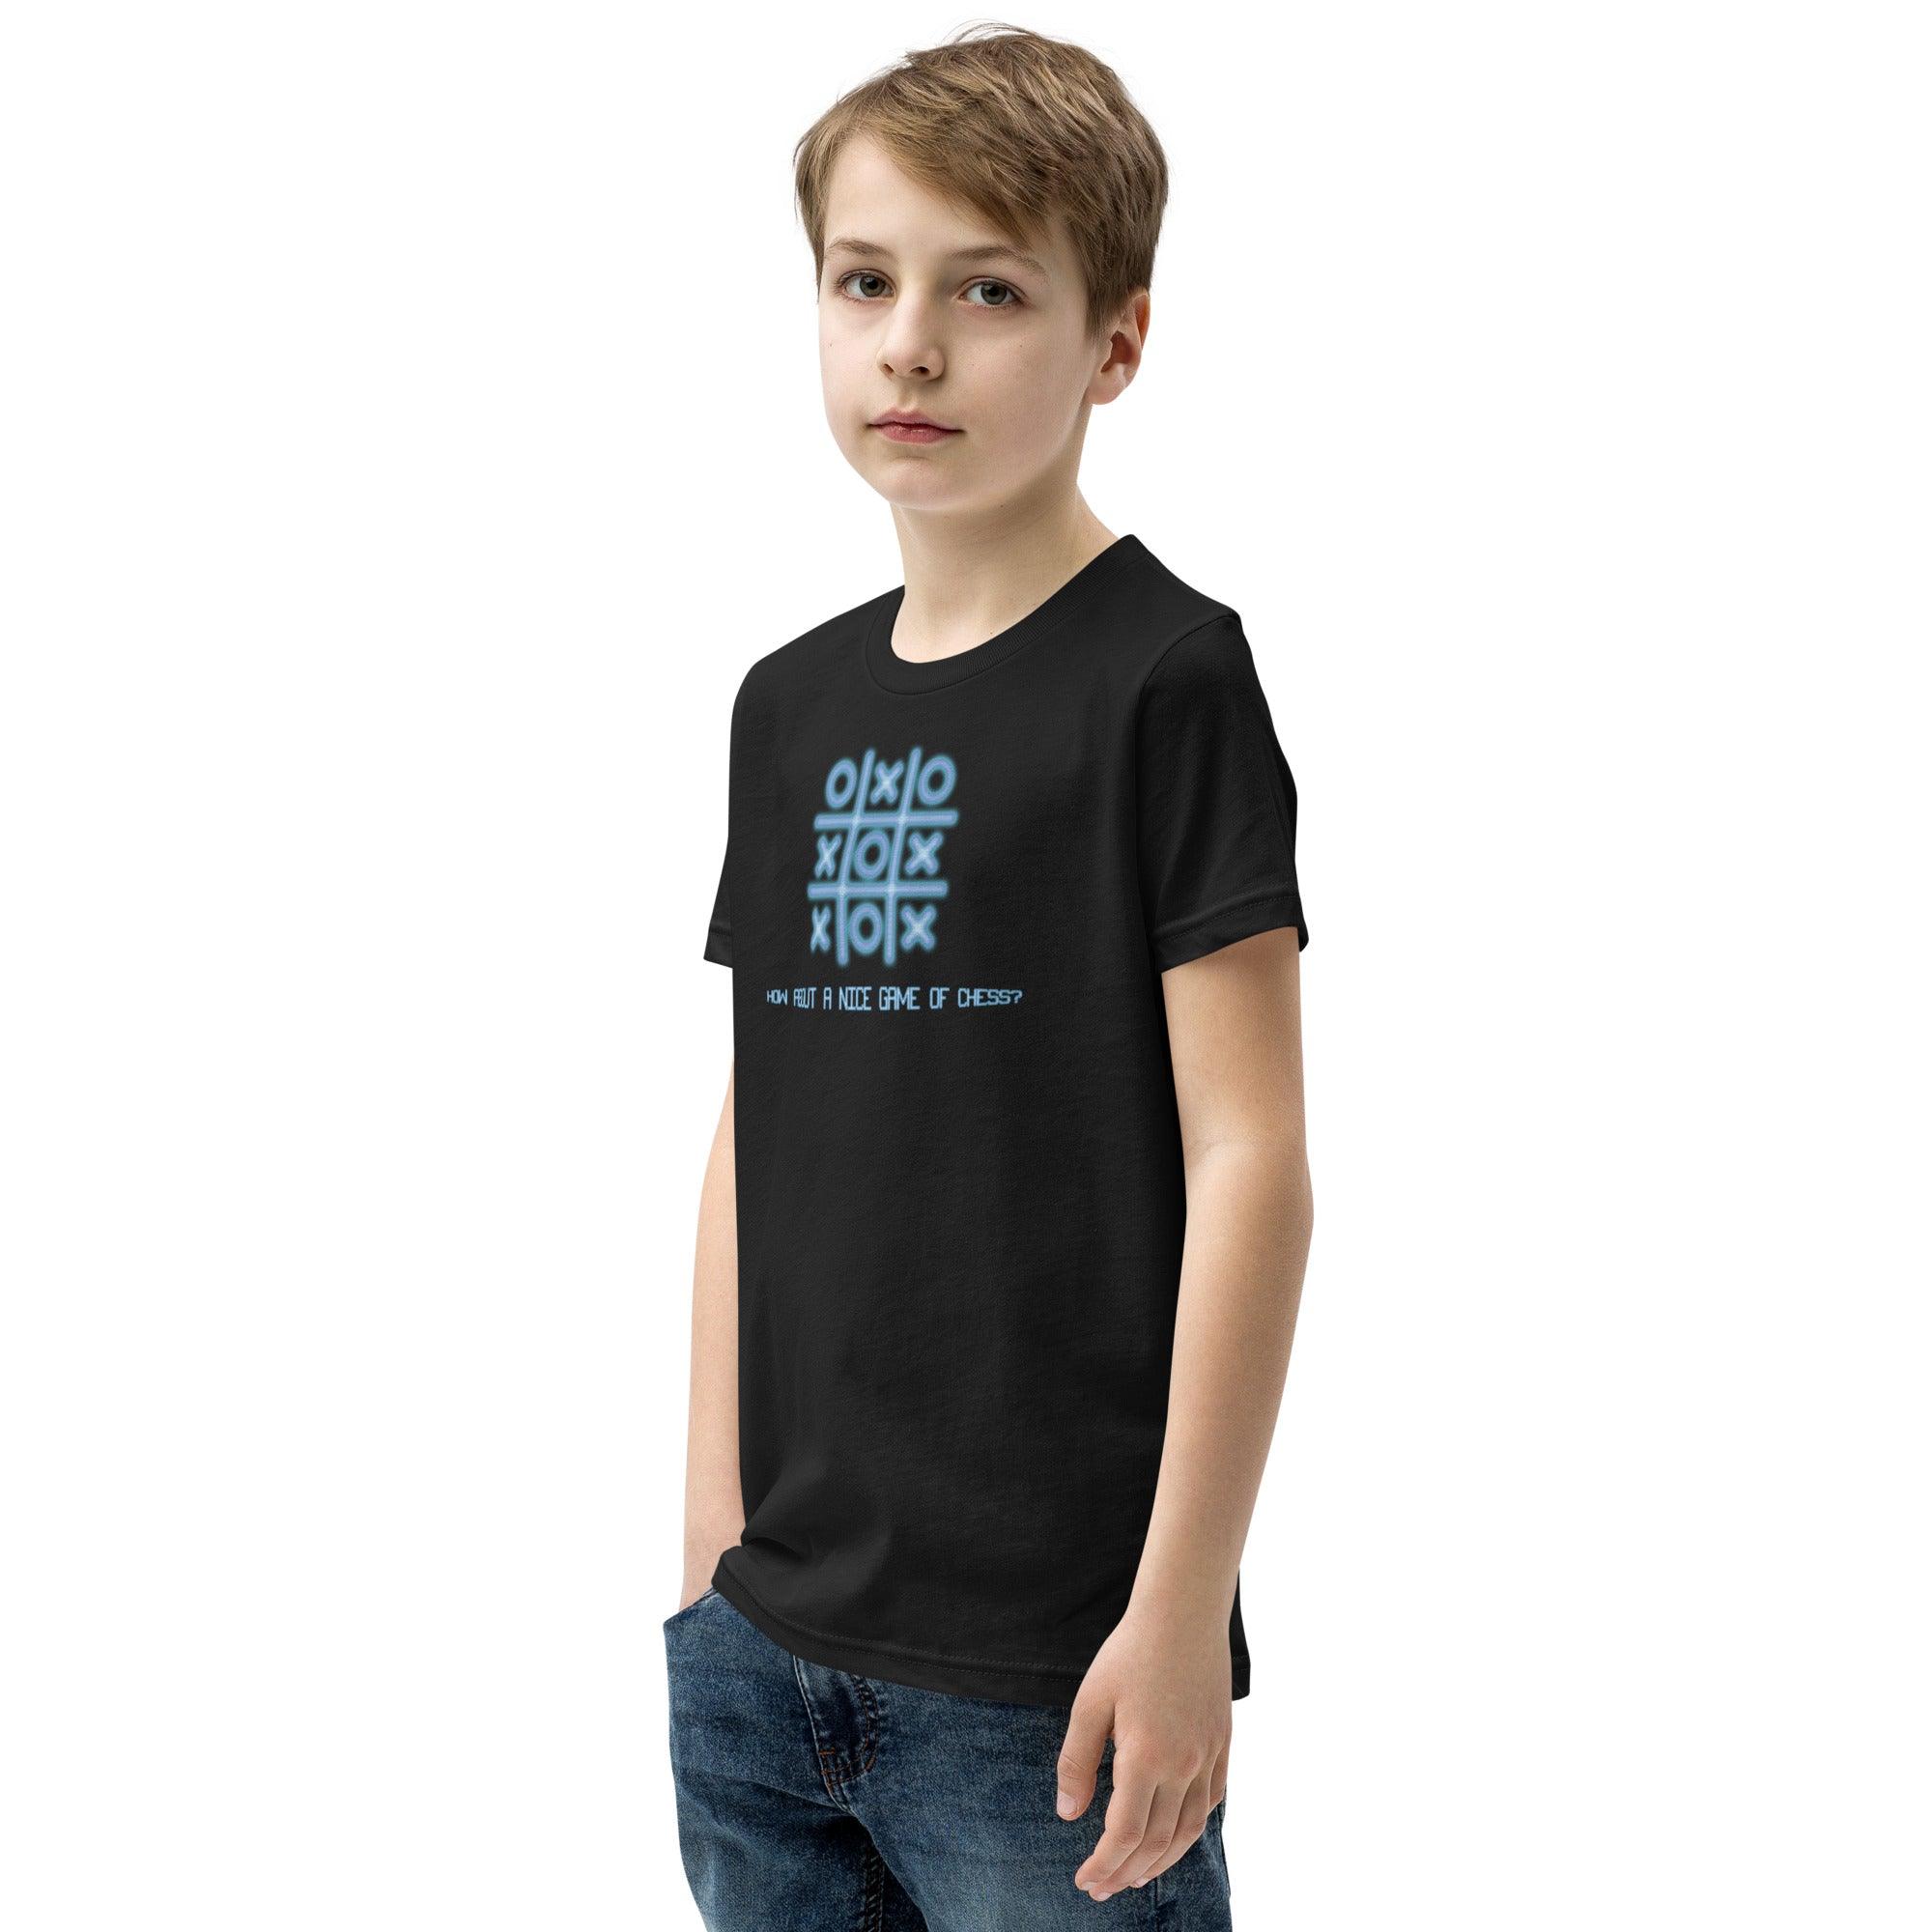 How About a Nice Game Of Chess? Youth T-Shirt